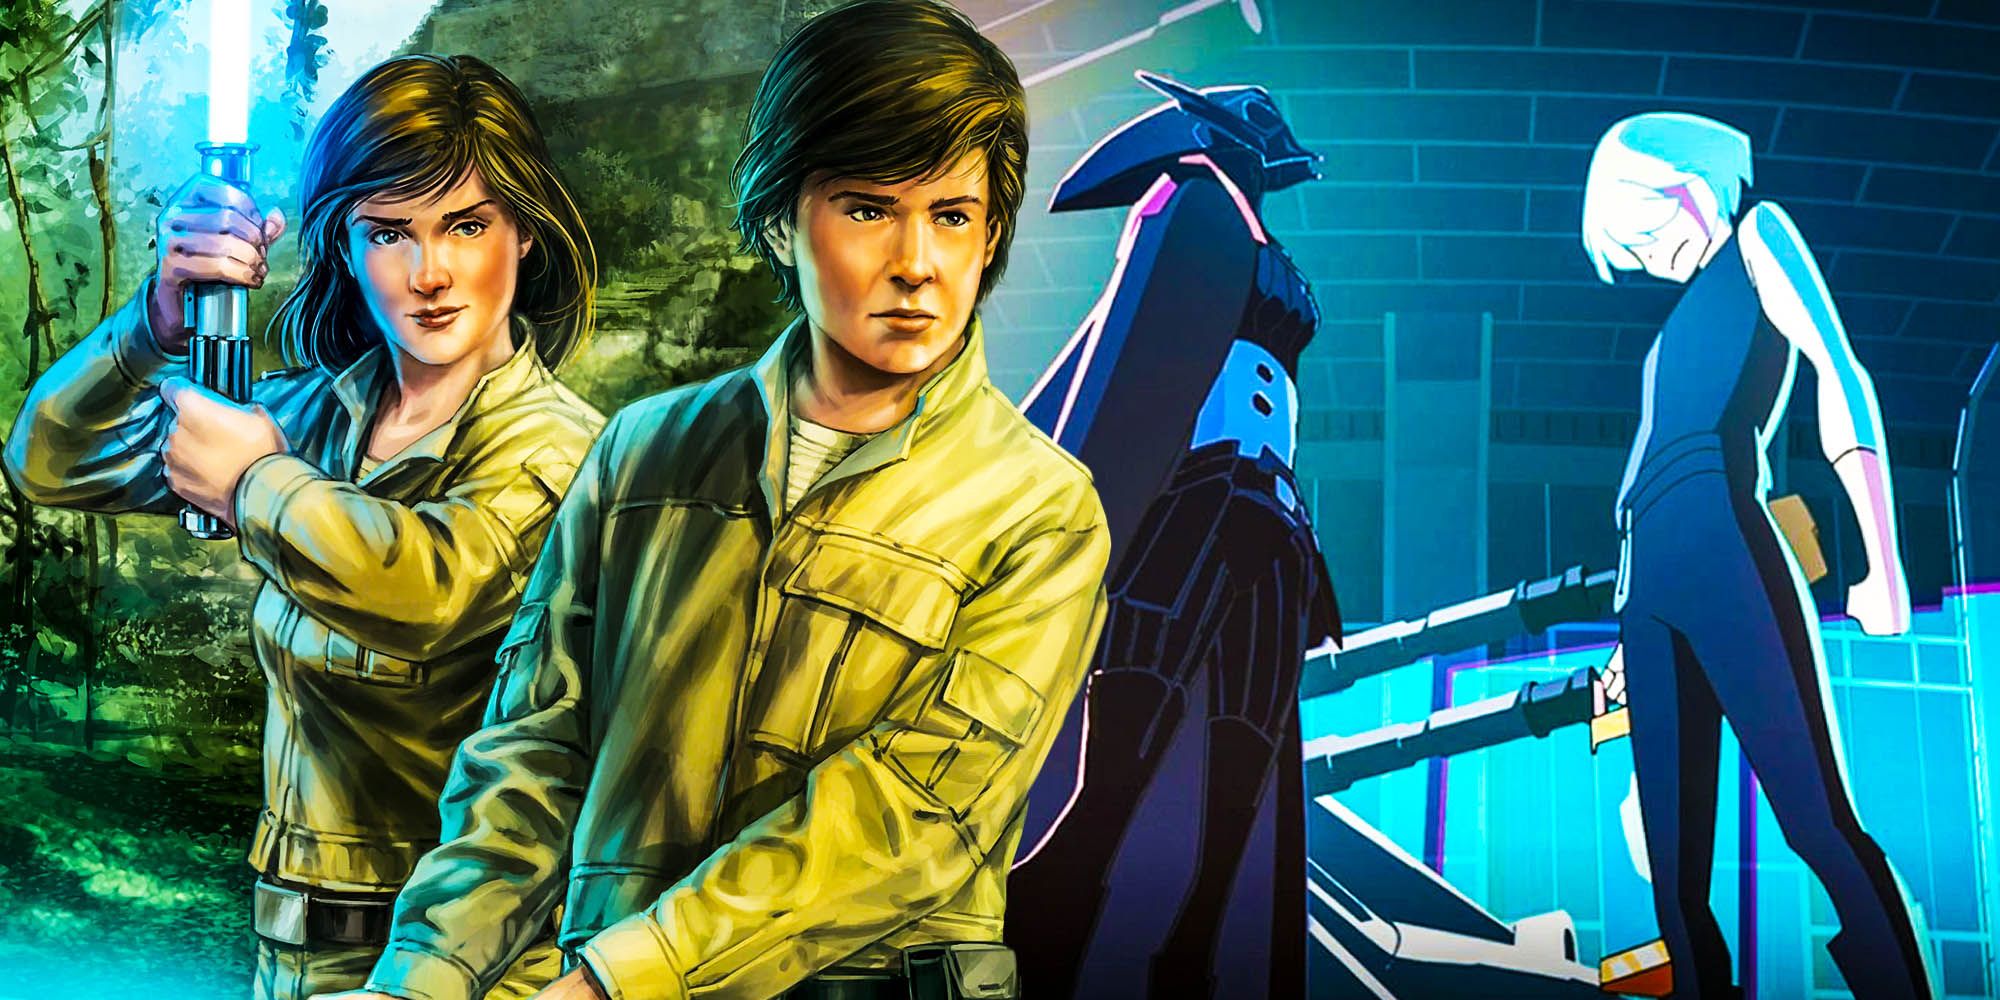 star wars visions the twins flips Legends Han and leia children story